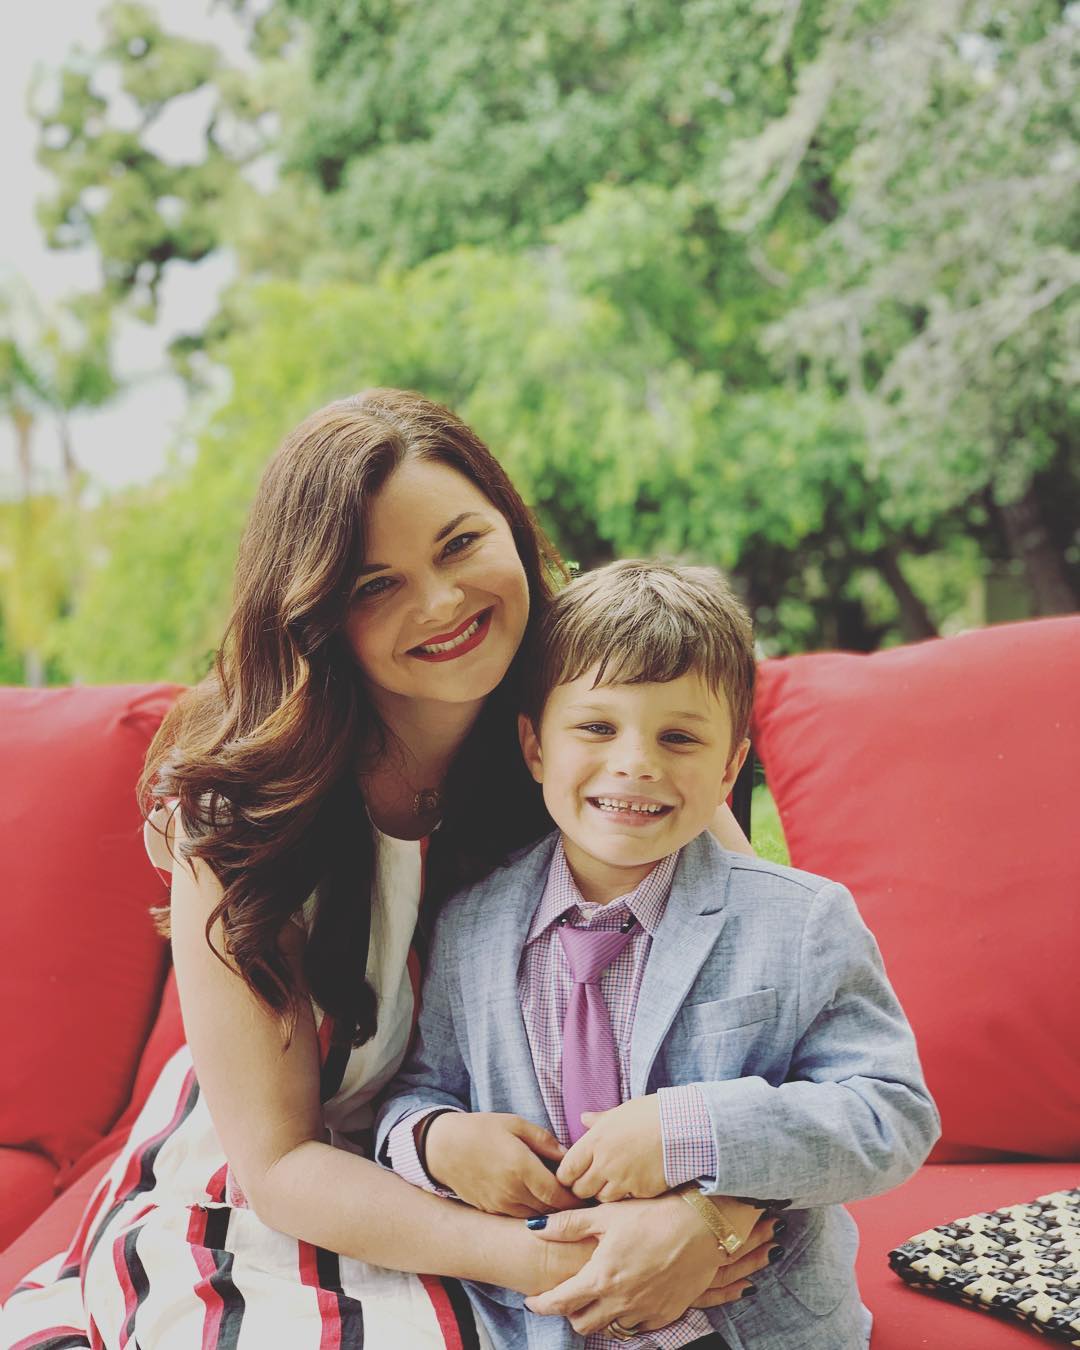 Heather Tom with his son Zane Alexander who's wearing suit.